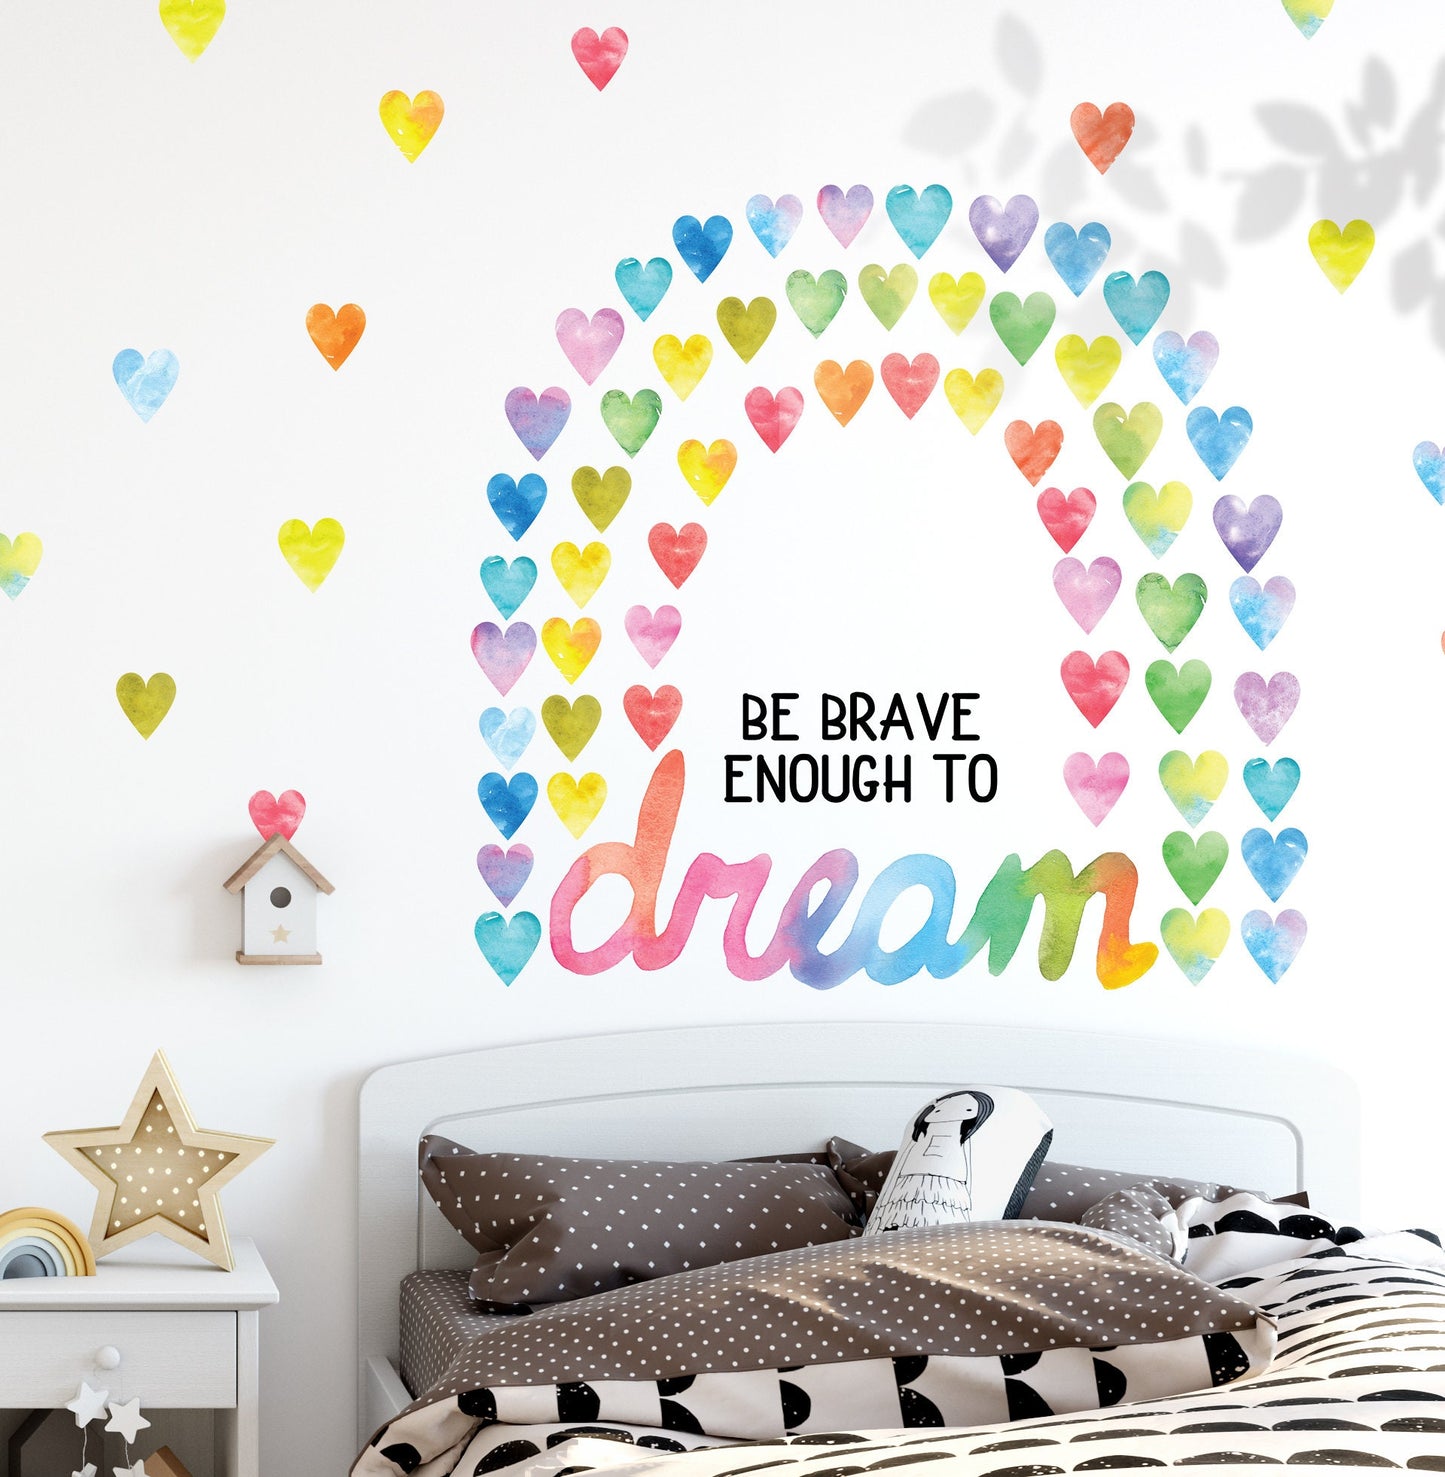 Be Brave to Dream Wall Decal Color Rainbow Heart Sticker, LF104